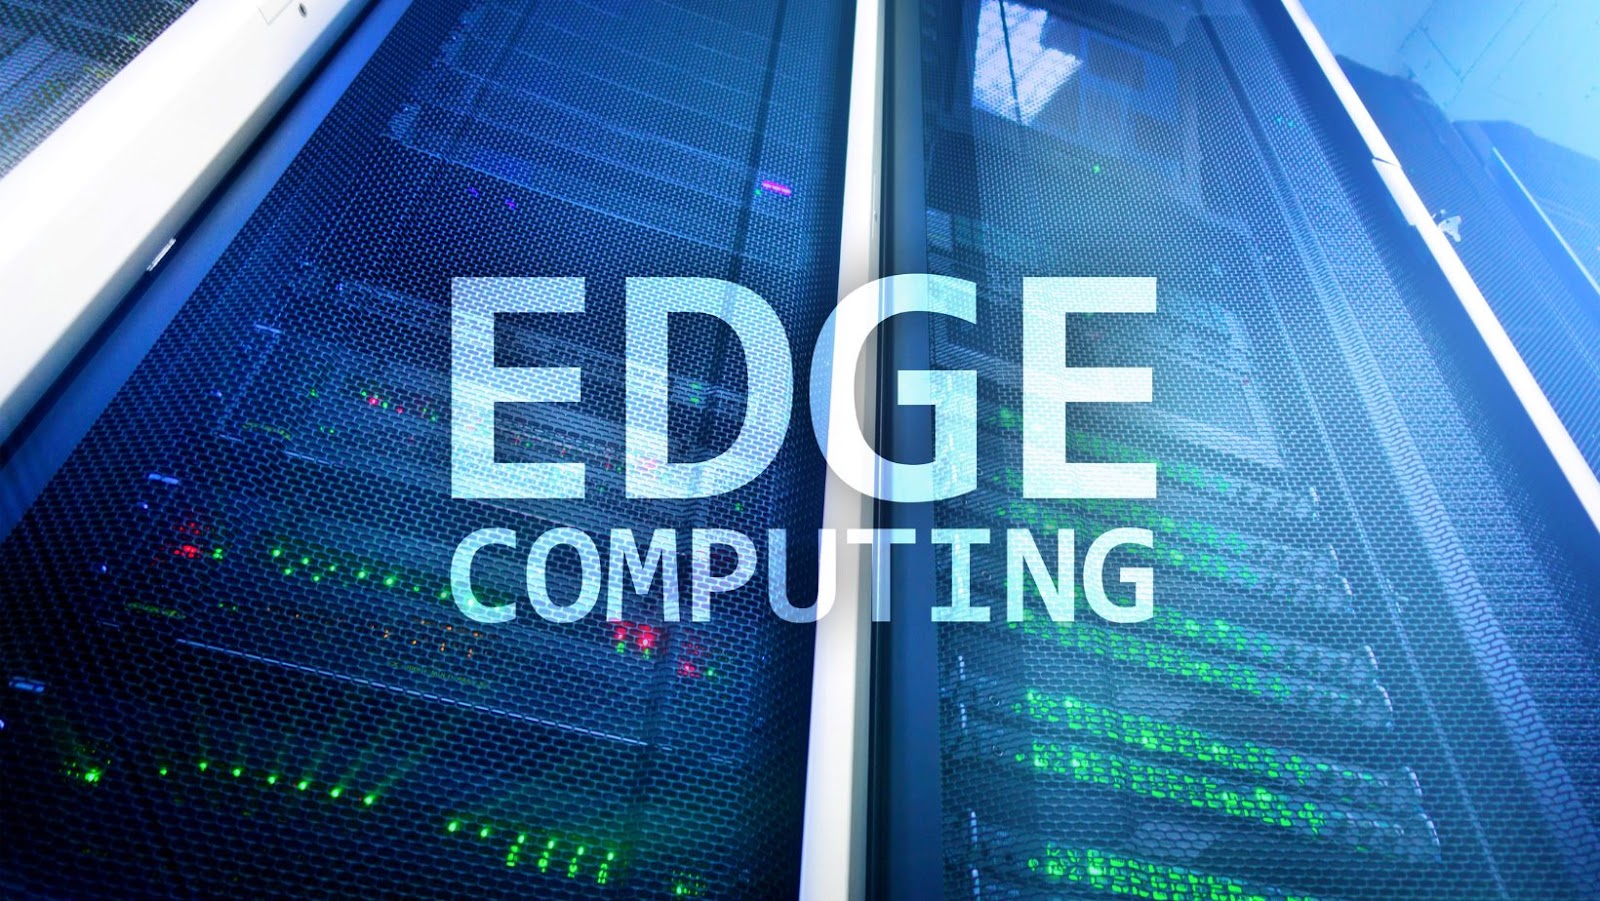 Edge Computing vs Cloud Computing: Which is Better for Your Business?